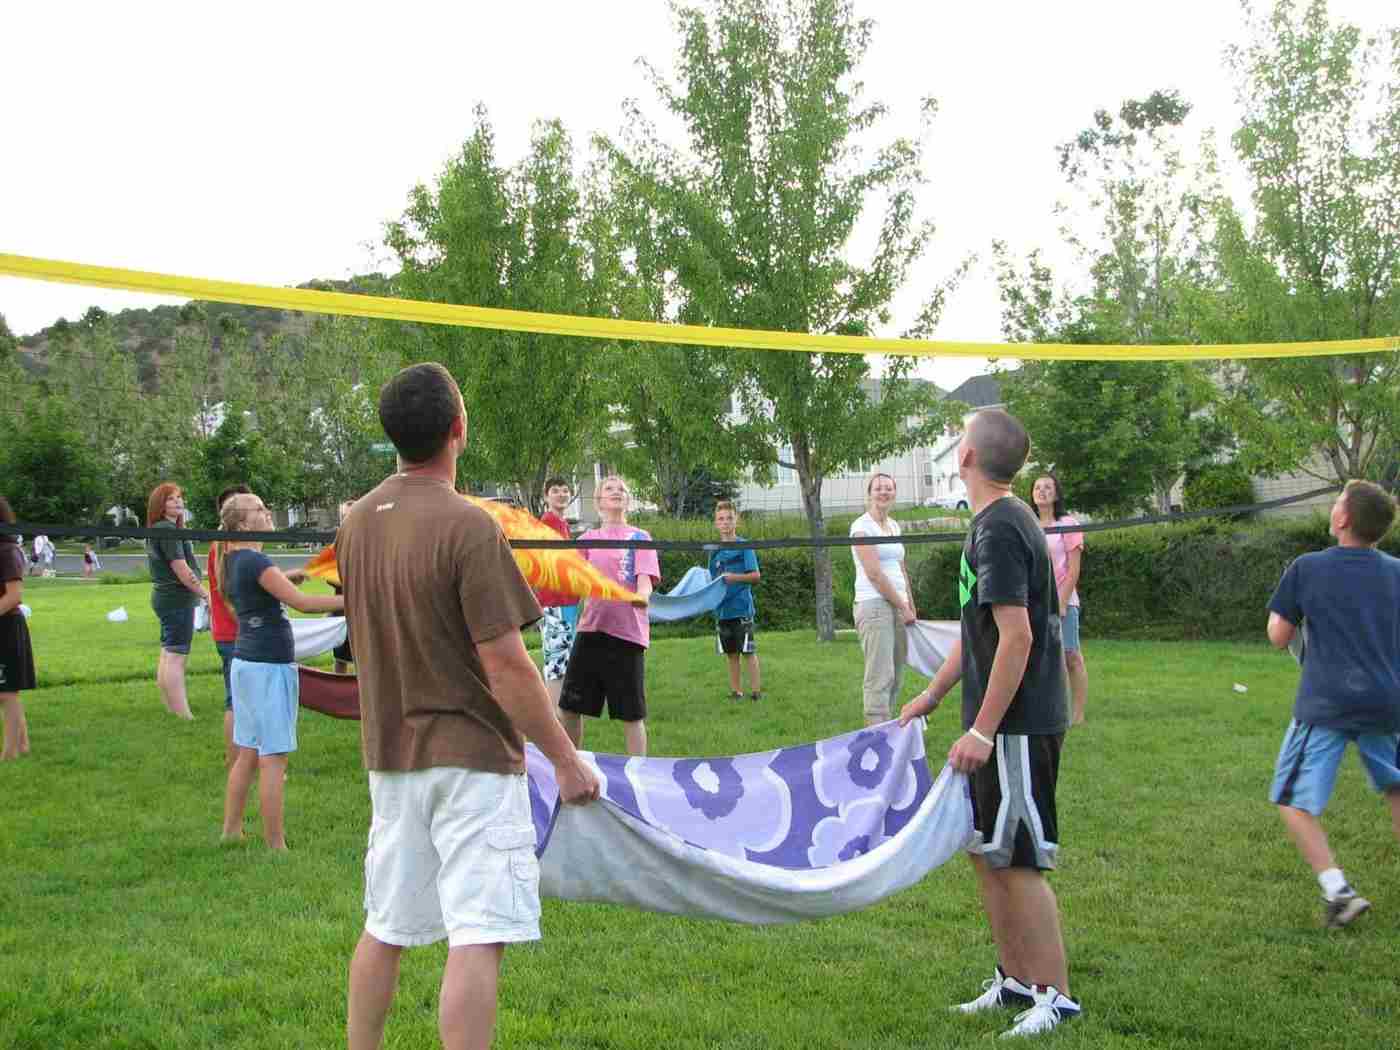 Idea for a volleyball game with water bombs and hand tools